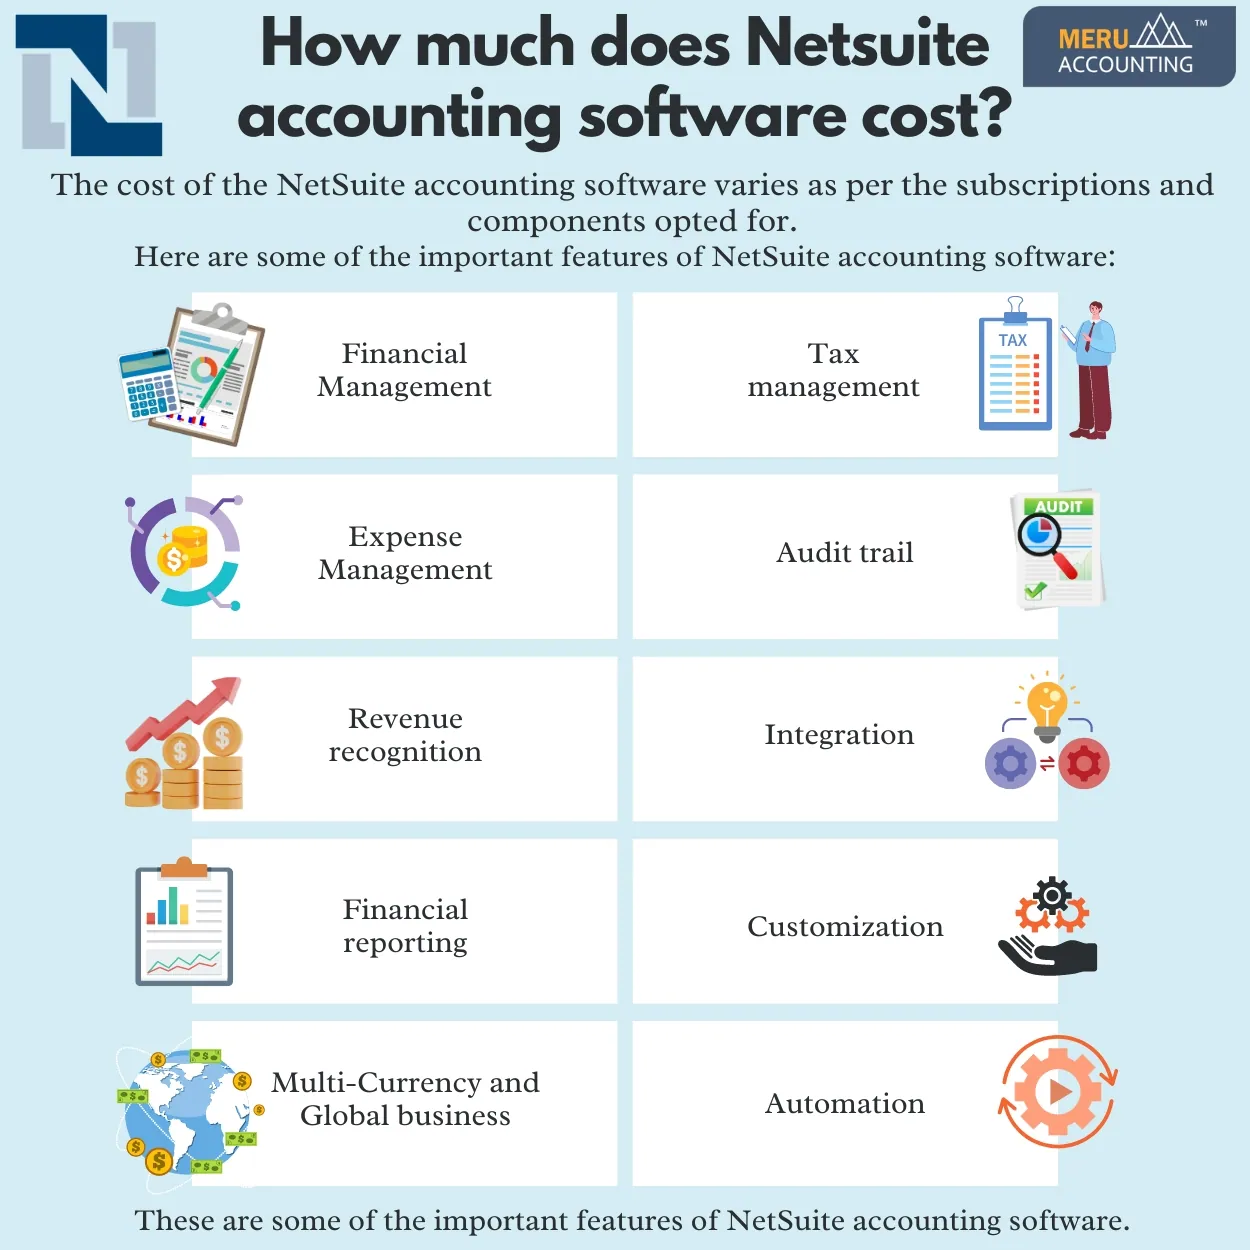 netsuite accounting software